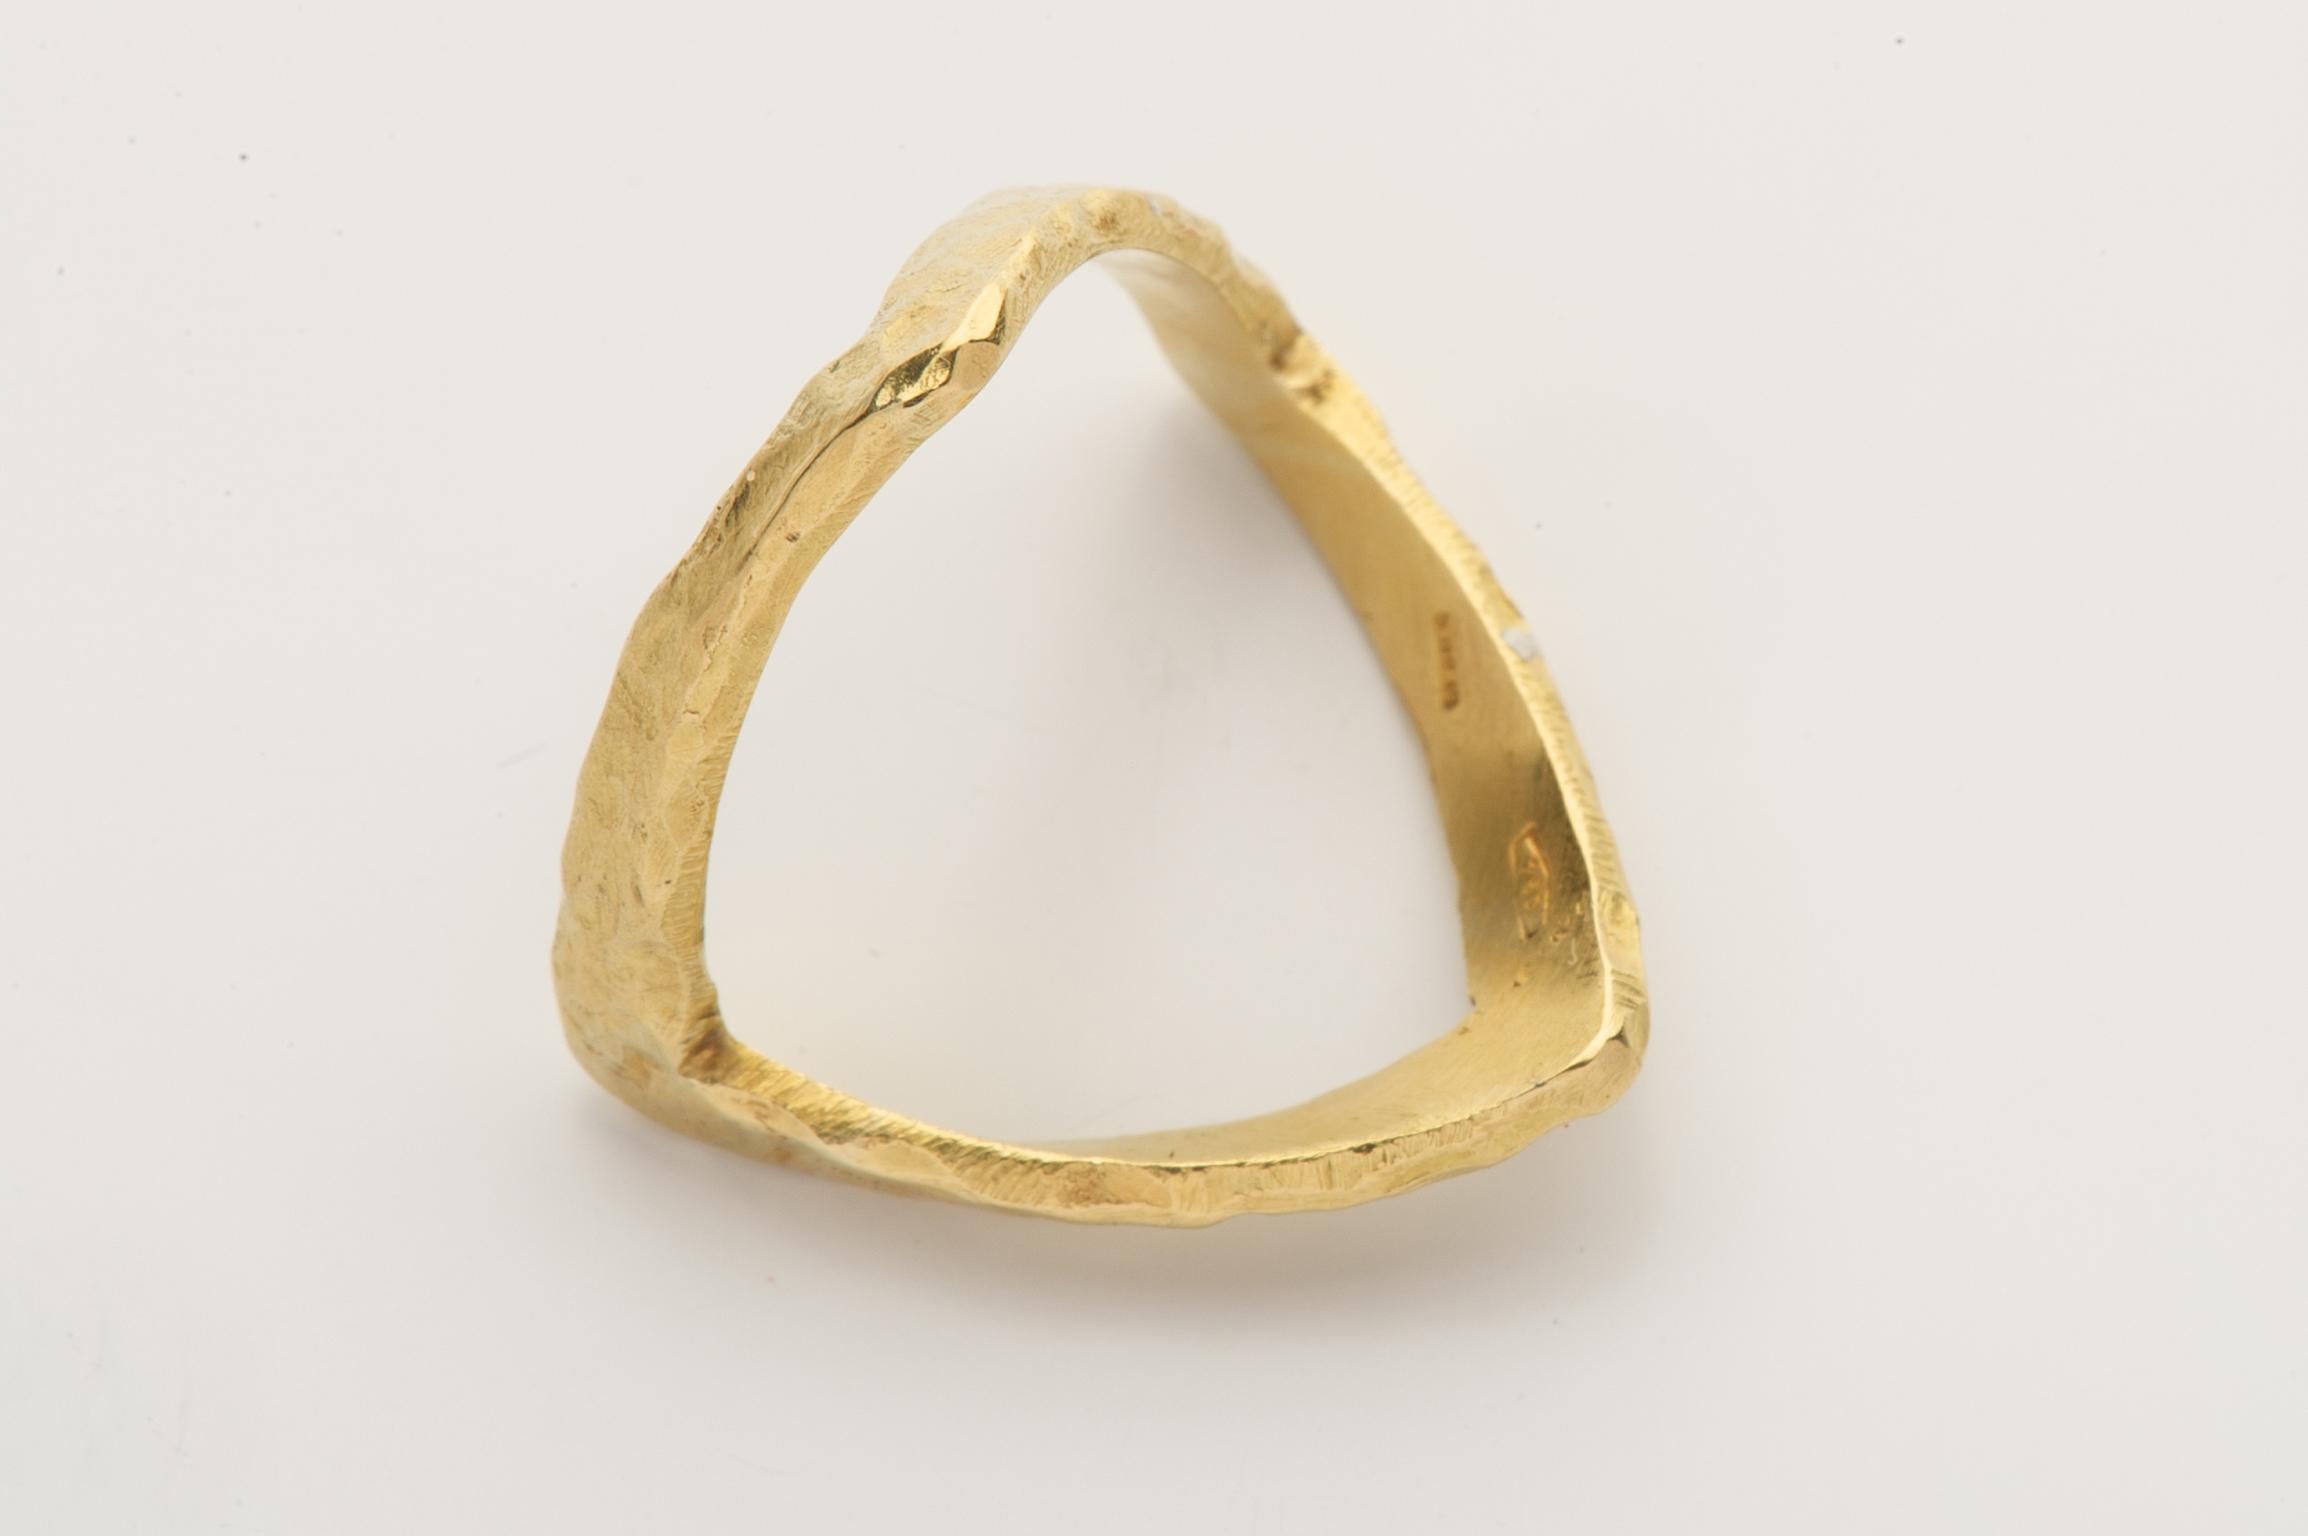 Italian gold ring entirely hand made by goldsmith Soldani - model of an ancient Rome ring for the freed slave - In the photosthere seem to be some defects, but they are only the shadows of the hand-sculpted gold.
(personal refer.).